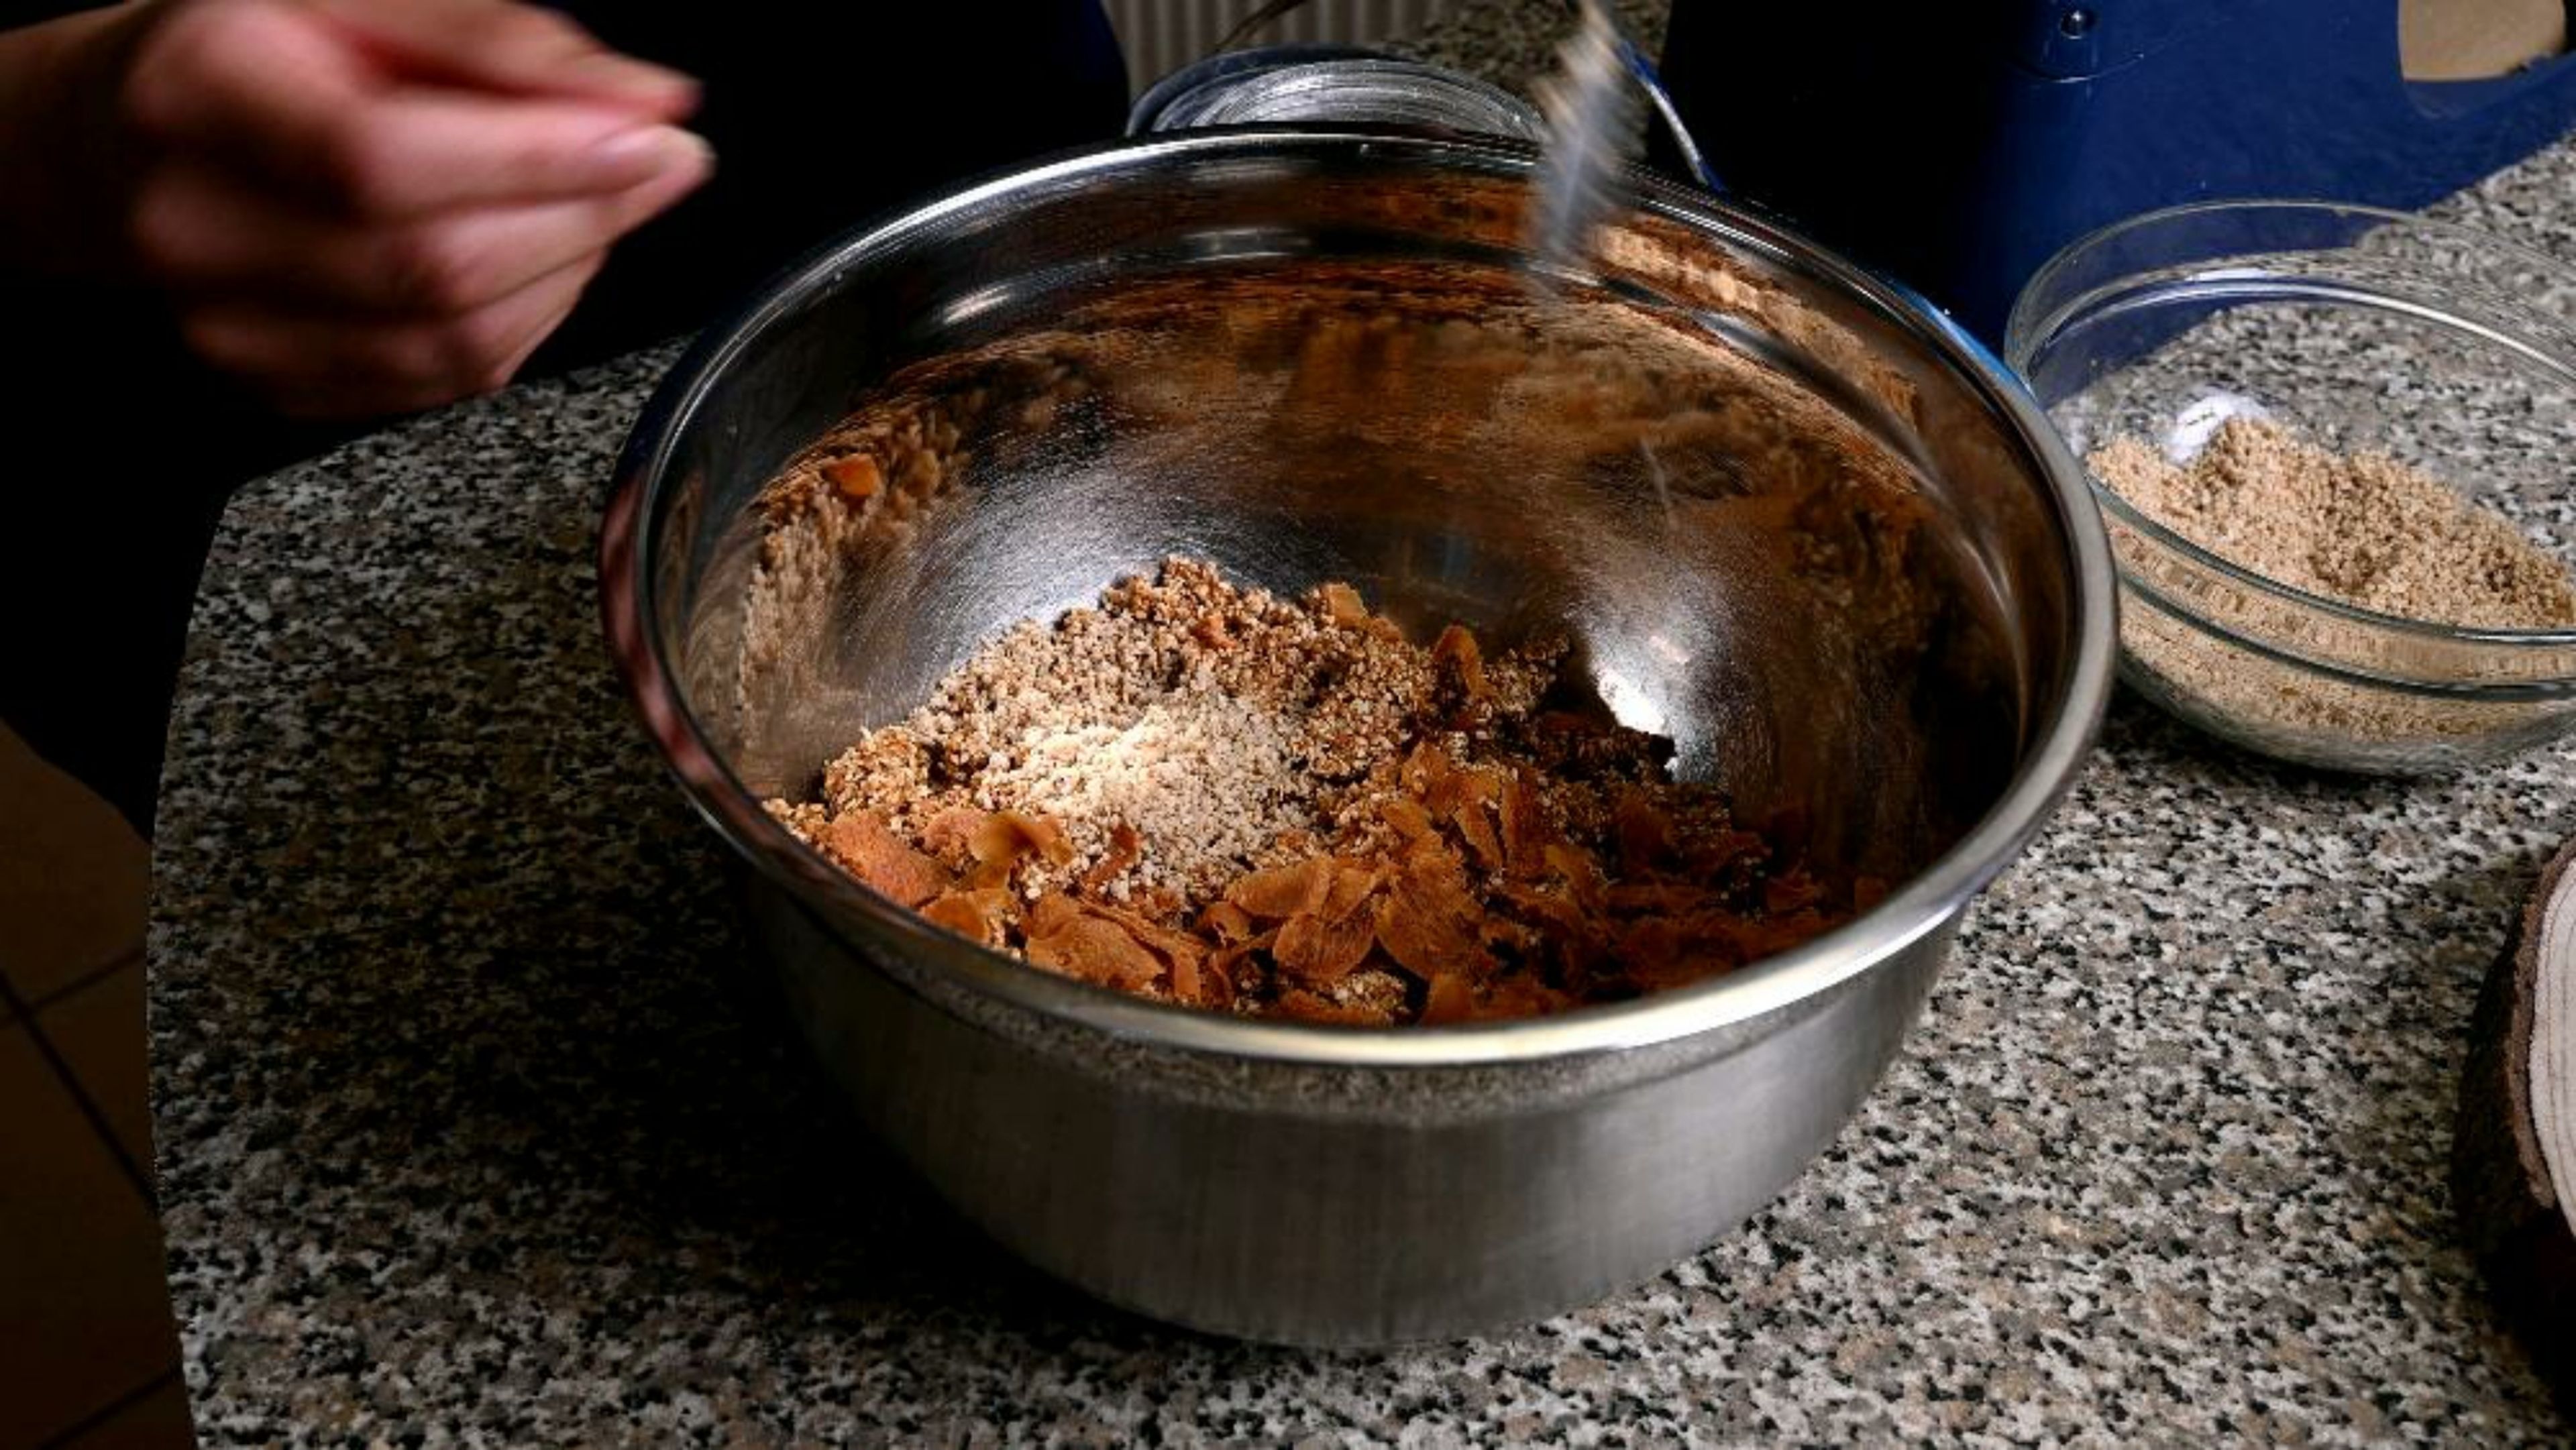 Gradually add the fine sesame seed powder to the large bowl and mix to combine with the pulsed sesame seeds and jaggery.